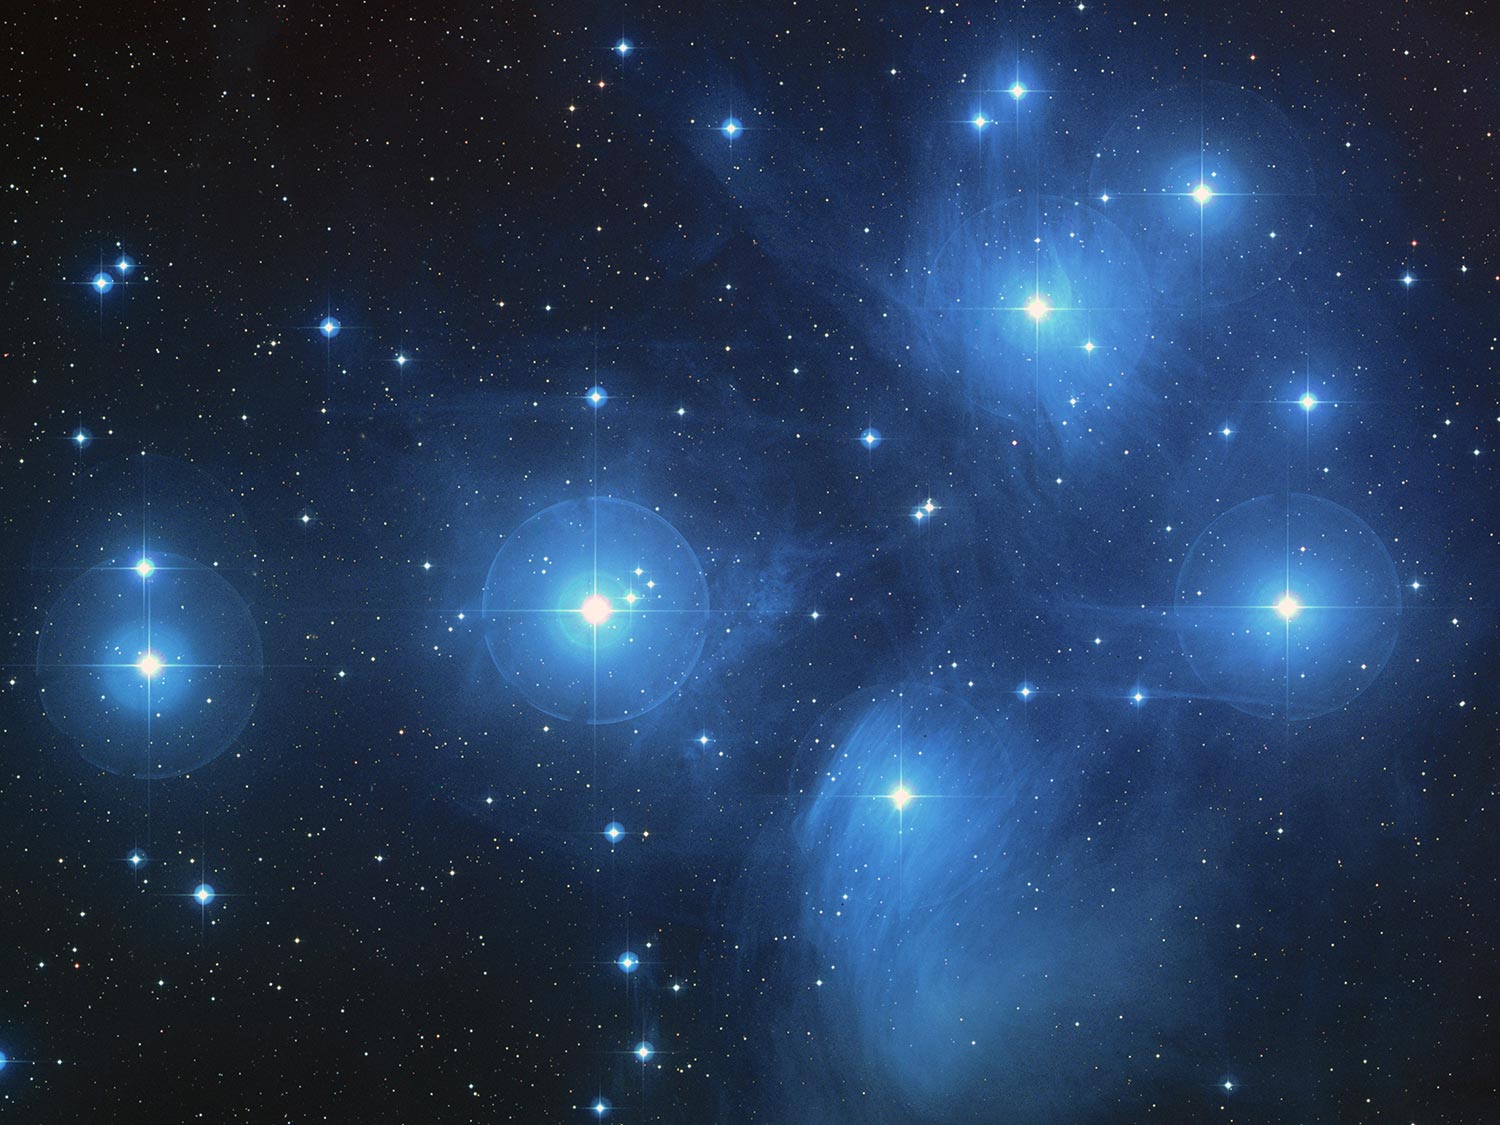 how long do stars live for and why do bigger stars such as blue giants have shorter lifespans